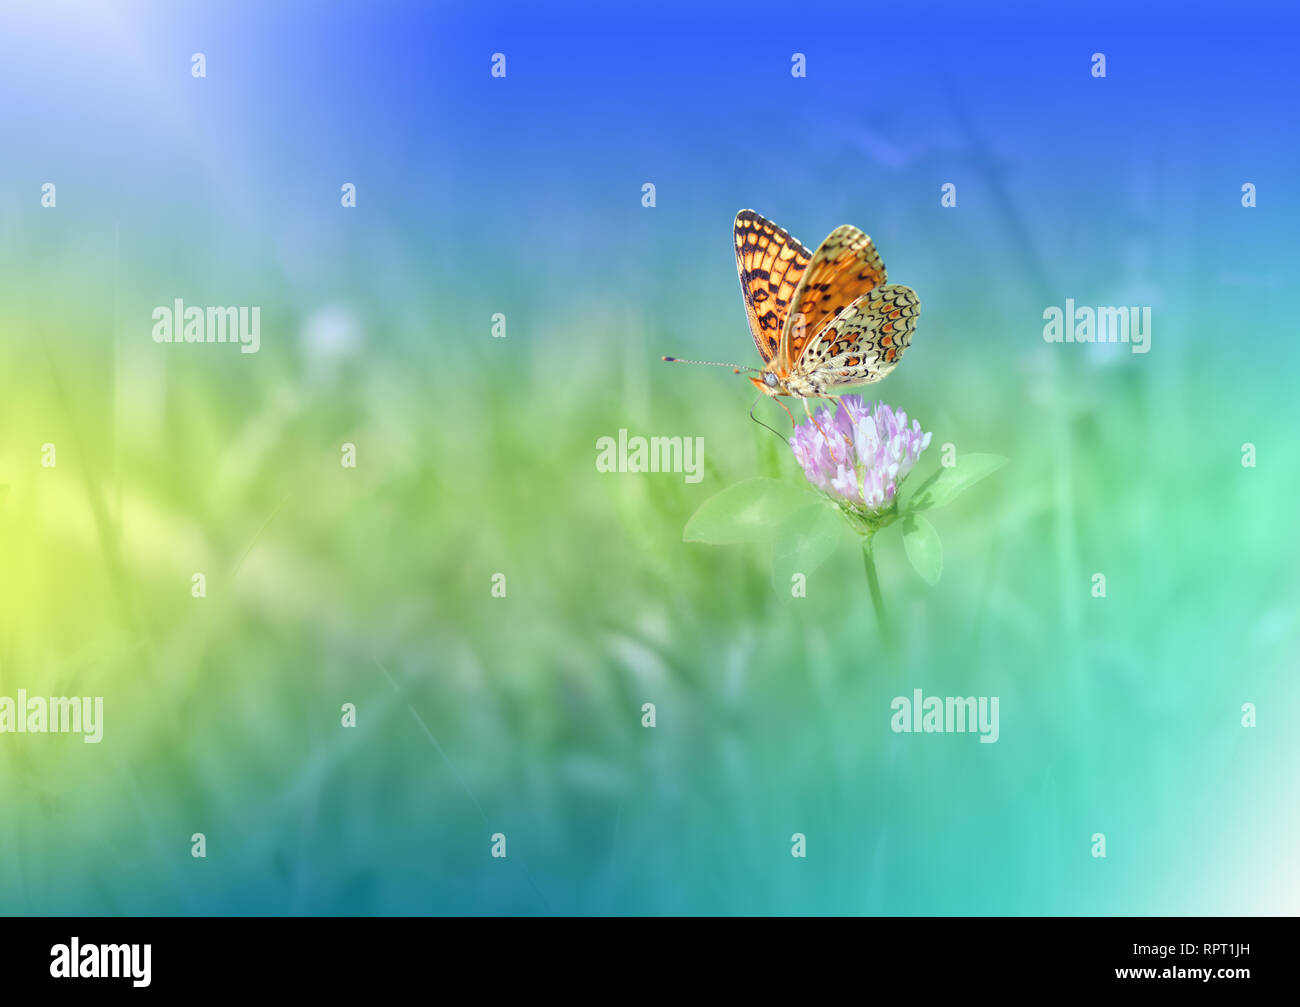 Beautiful Green Nature Background.Colorful Artistic Blue Wallpaper.Natural Macro Photography.Tranquil Beauty in Nature.Creative Butterfly Floral Art. Stock Photo